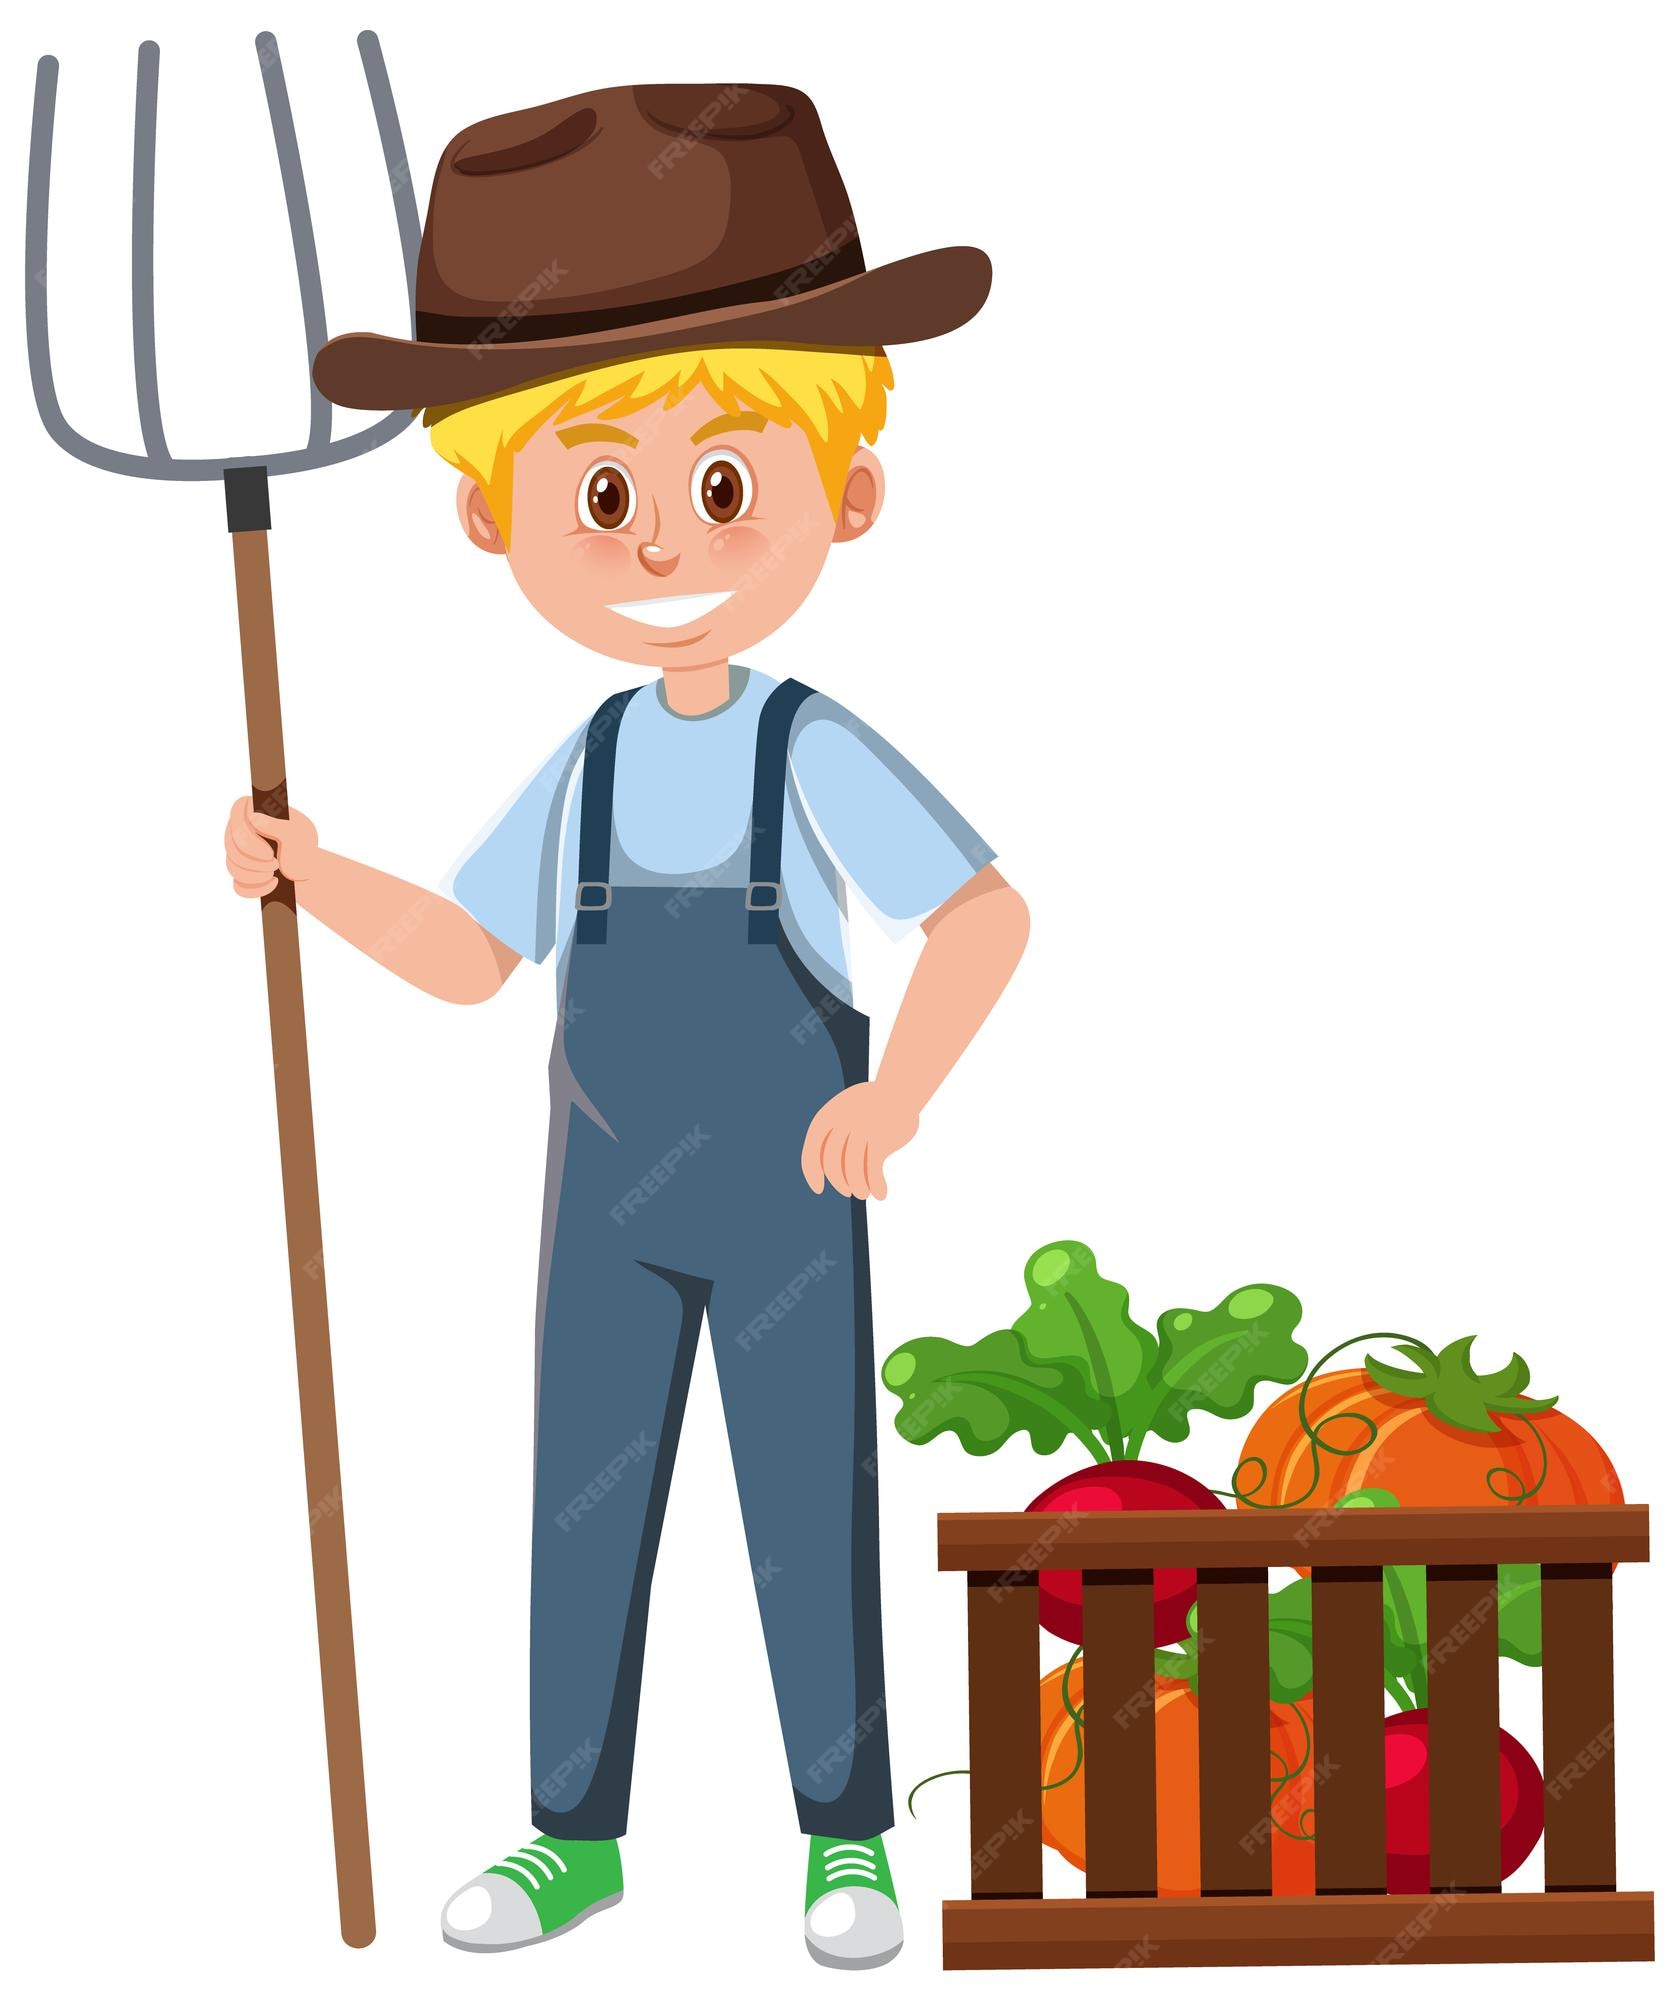 Premium Vector | A farmer cartoon character on white background